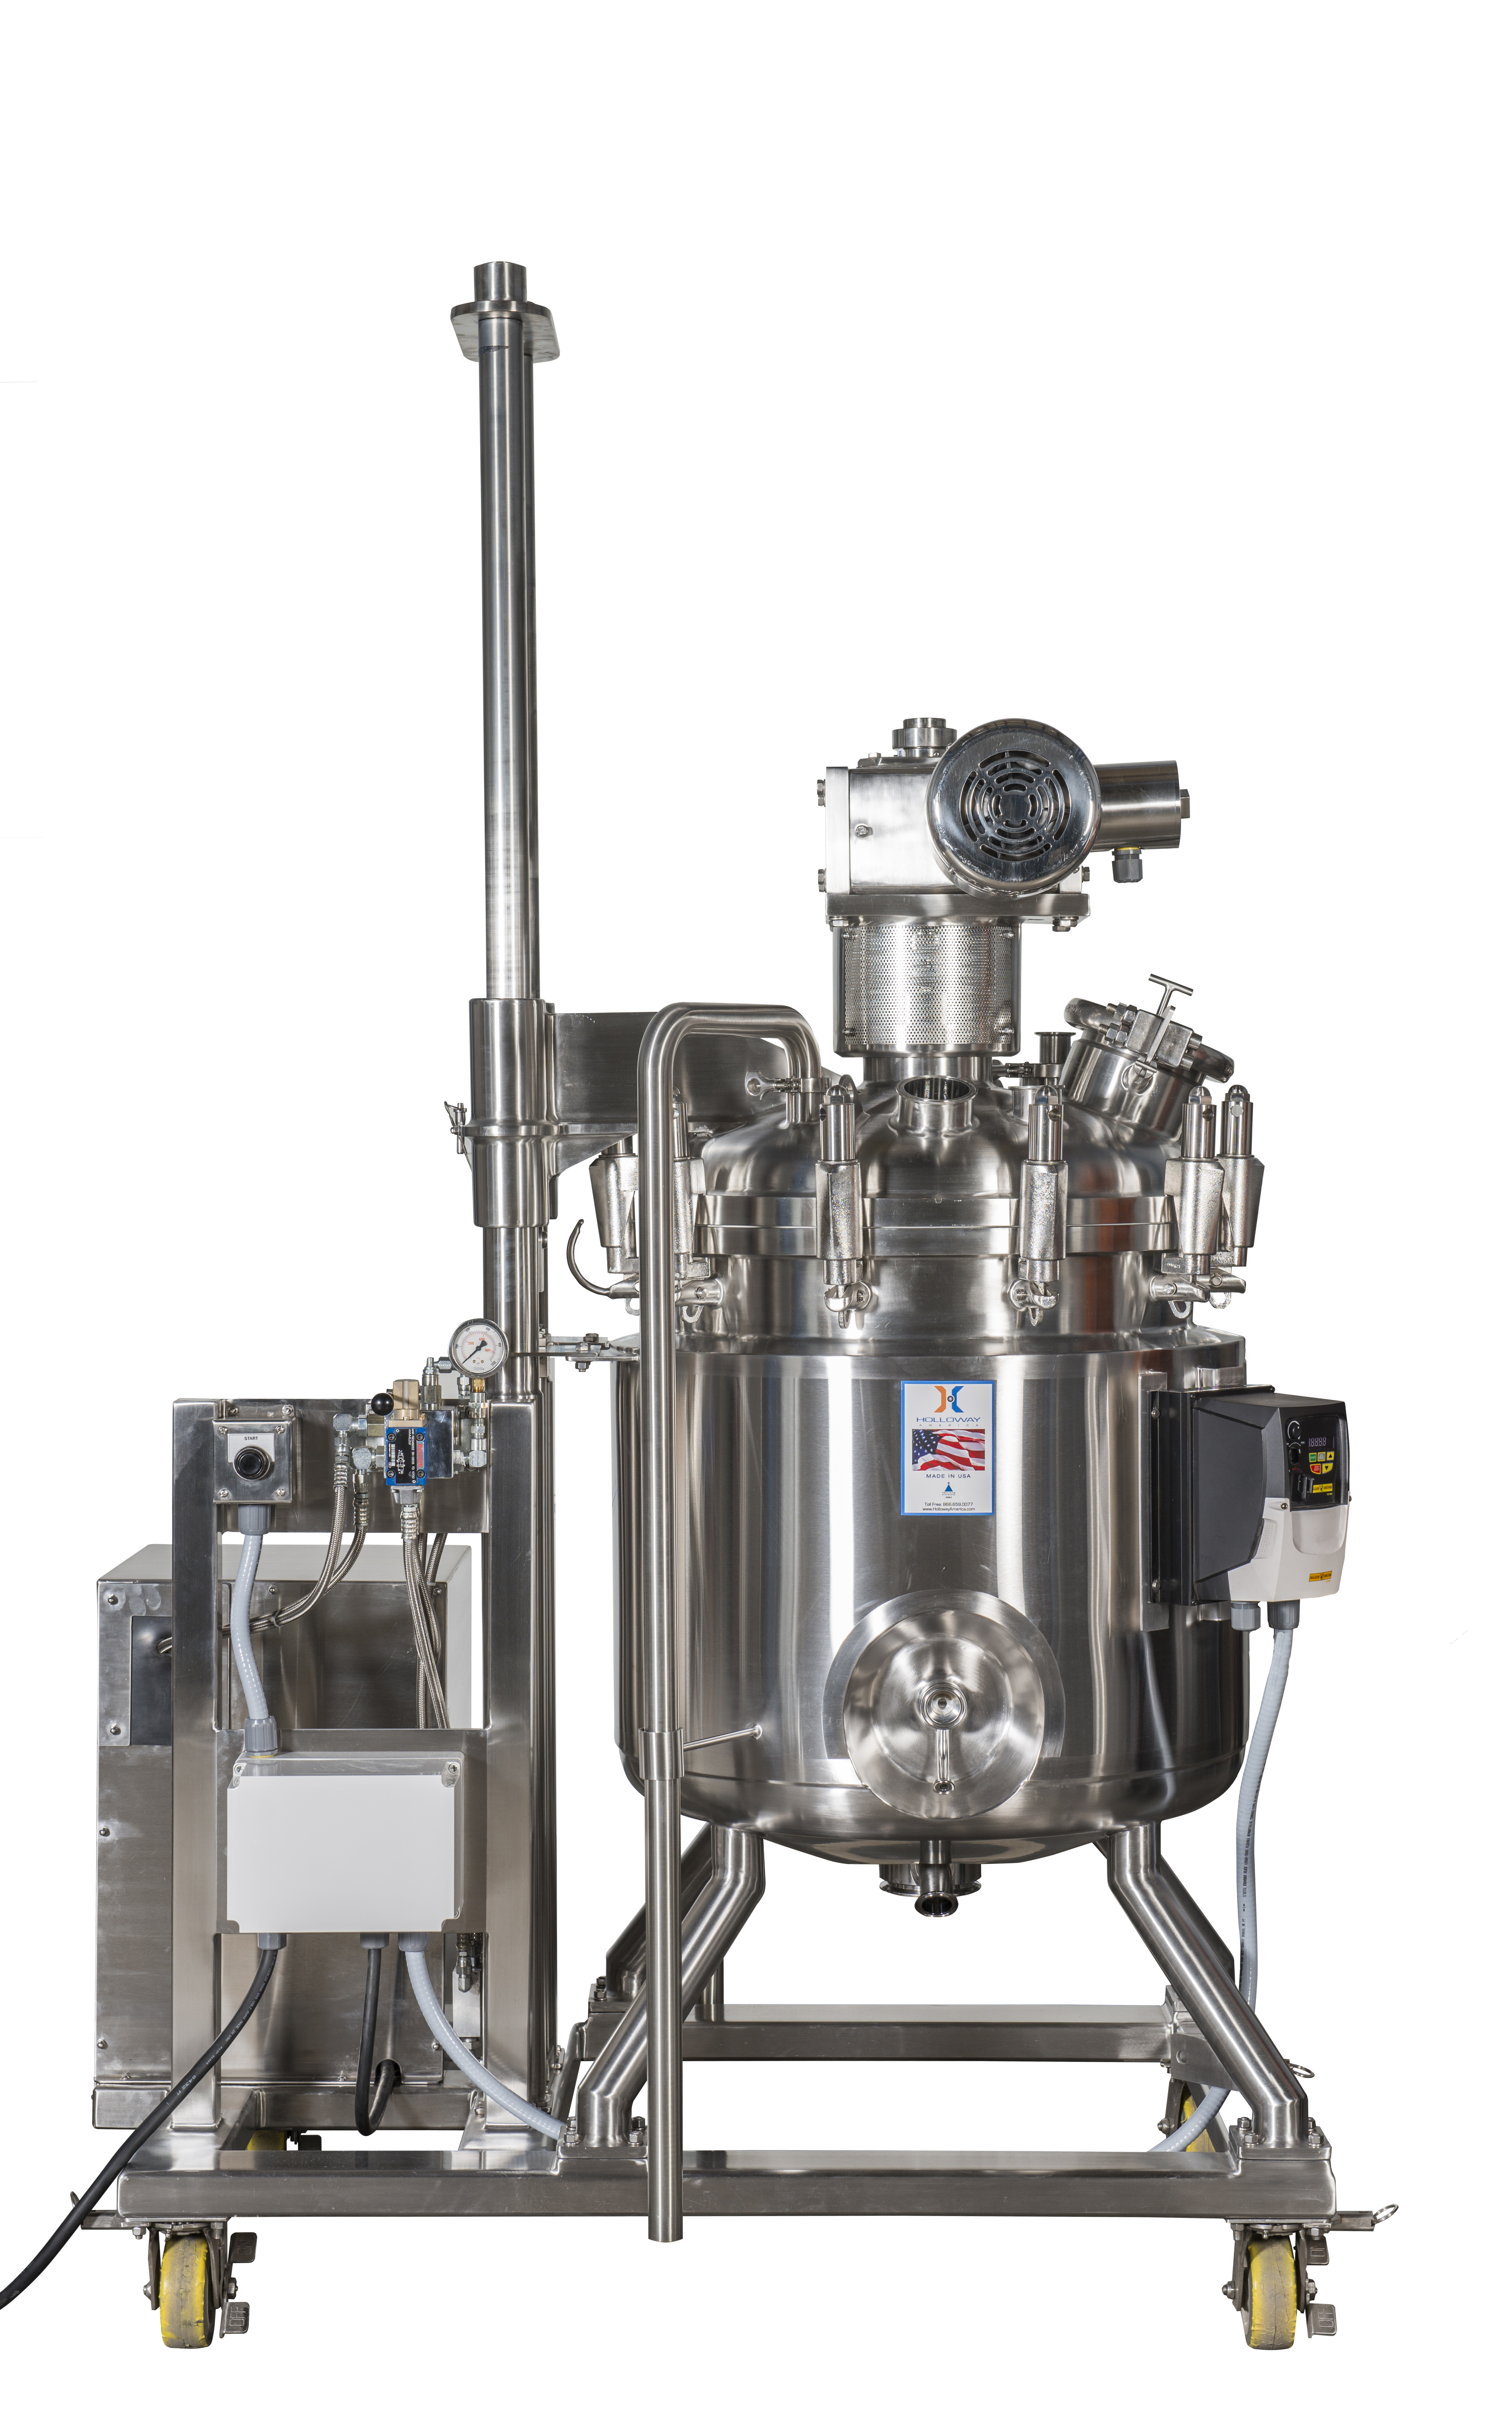 For a smarter mixing tank, this mixing vessel is built with a smart panel.